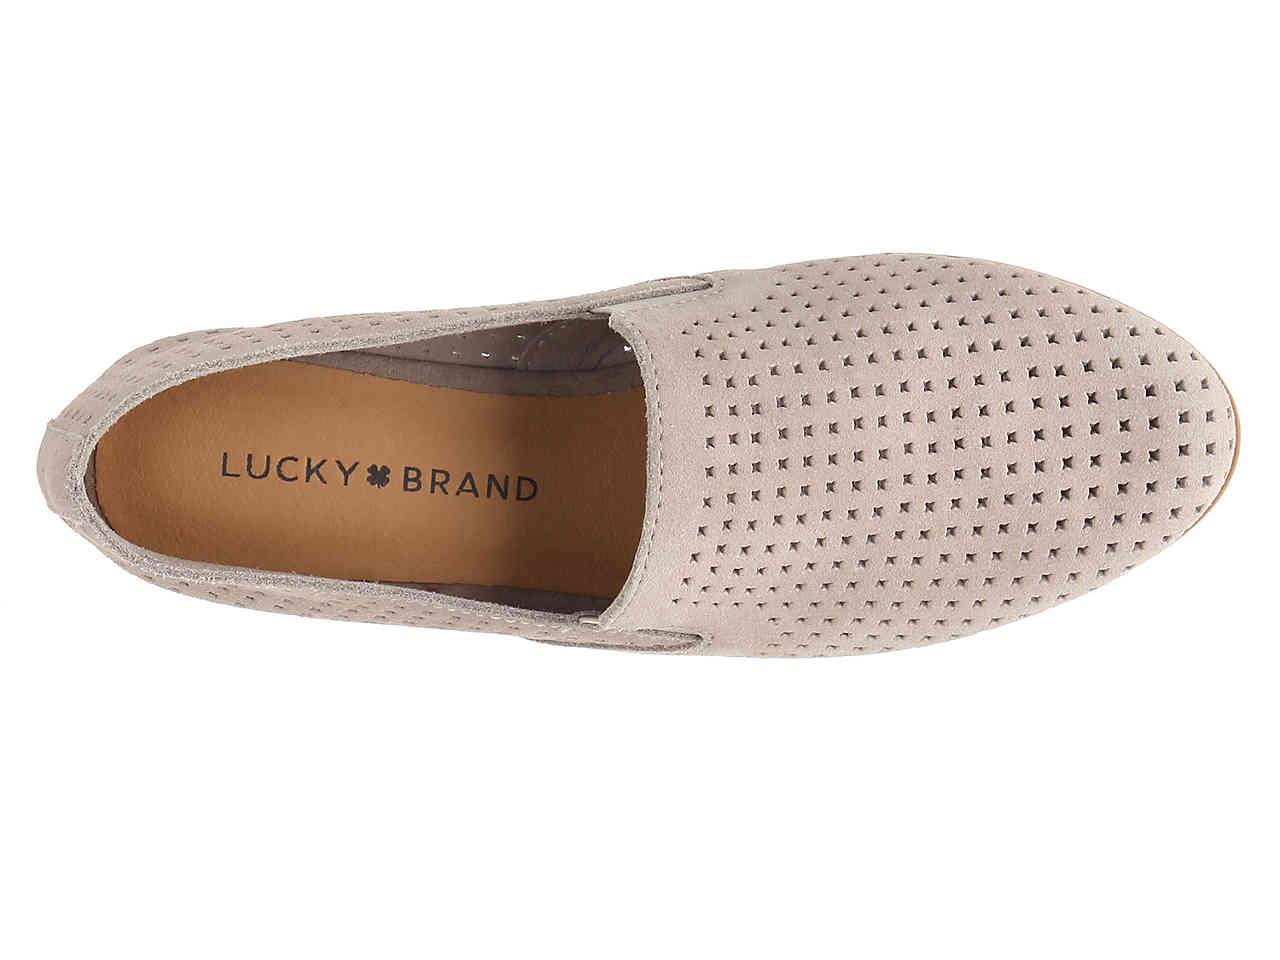 lucky brand carthy loafer black